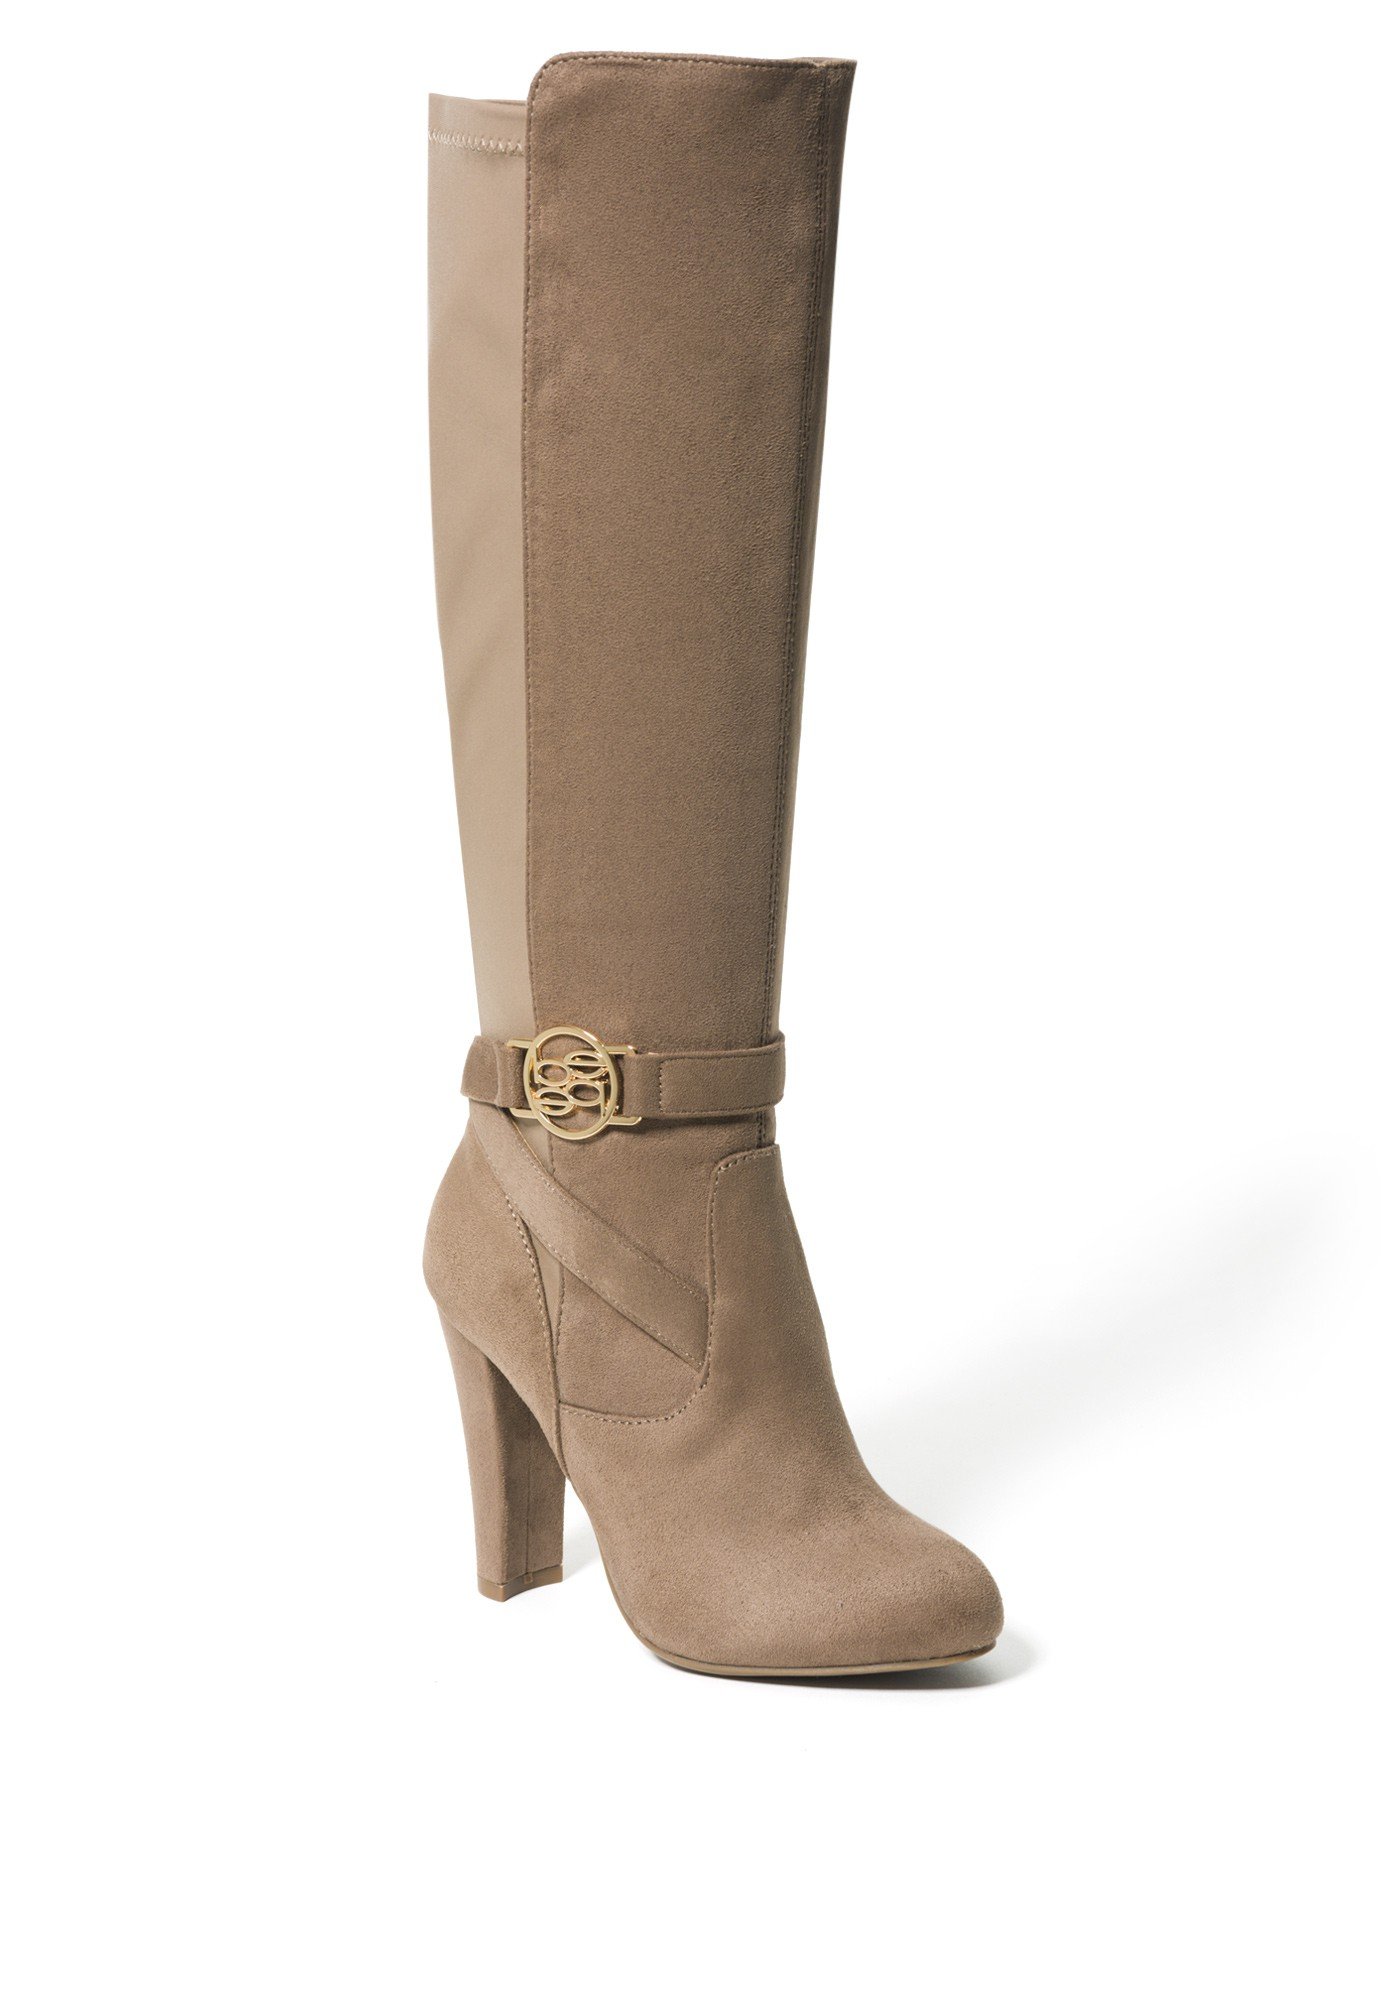 Bebe Women's Barya Logo Boots, Size 8 in Taupe Suede